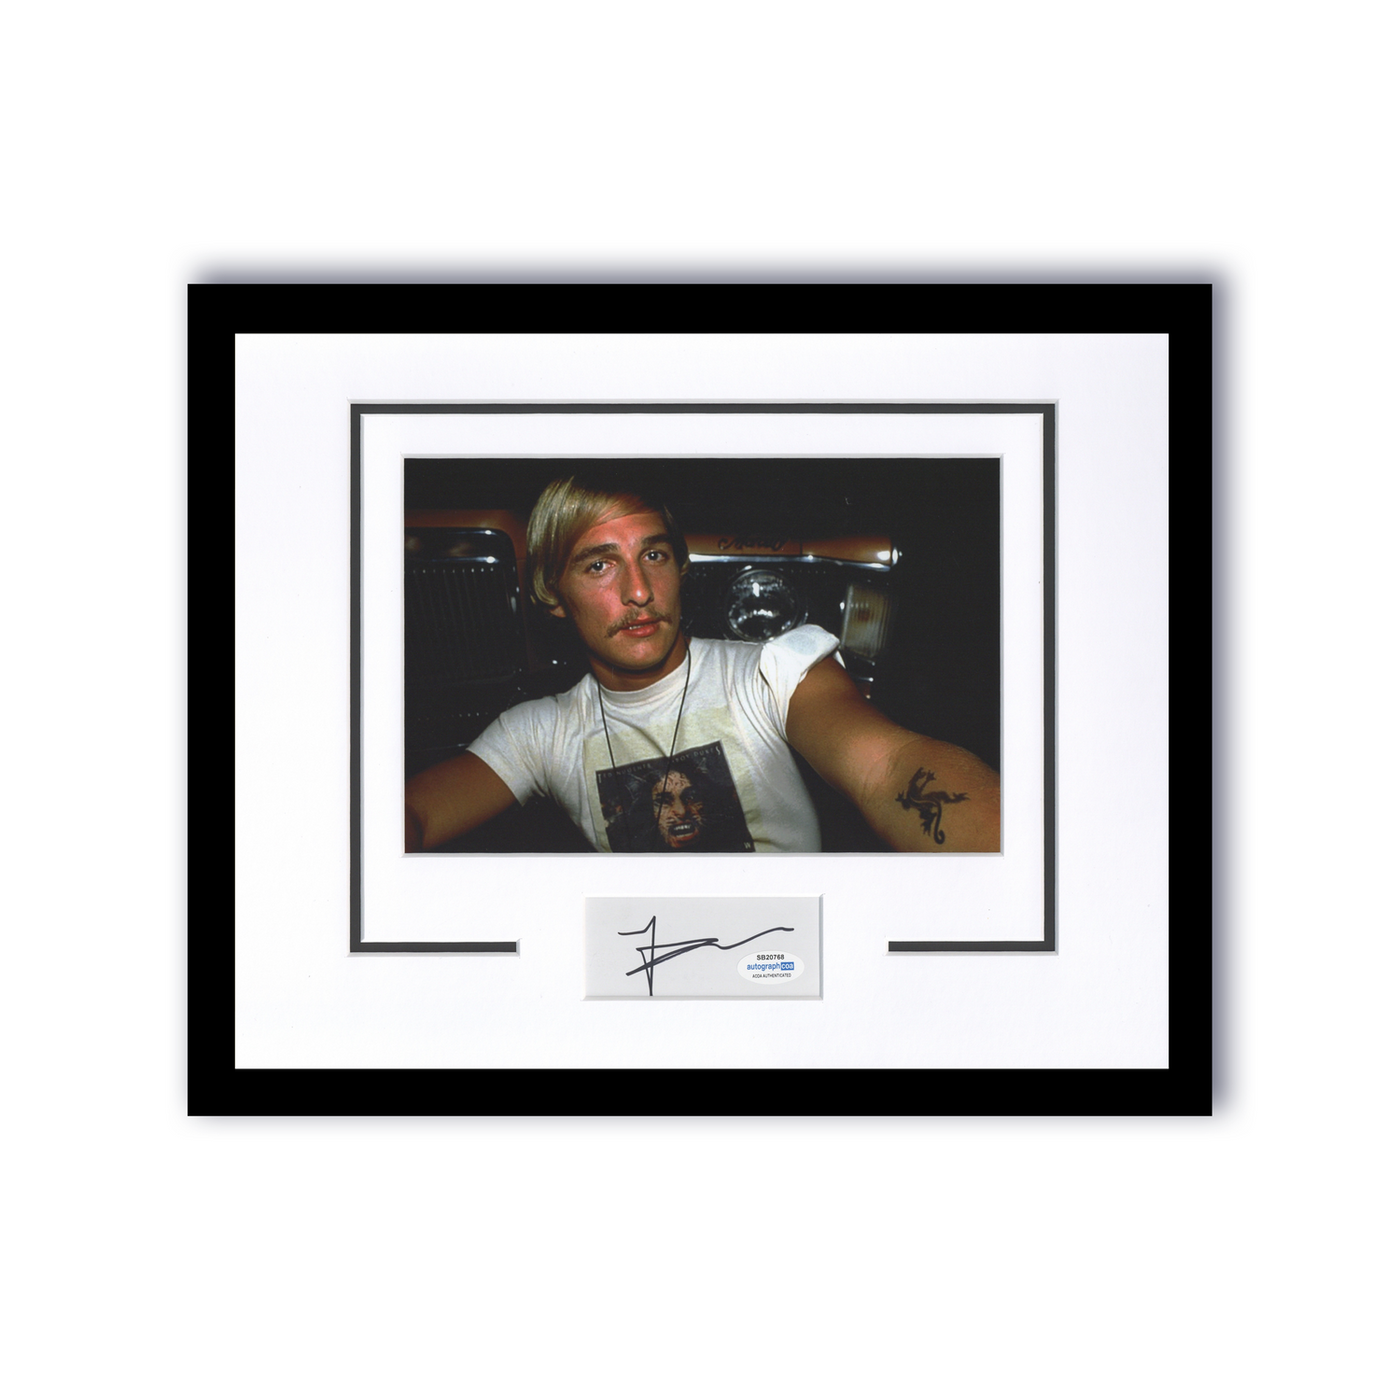 Matthew McConaughey Autographed 11x14 Framed Poster Photo Dazed And Confused Signed ACOA